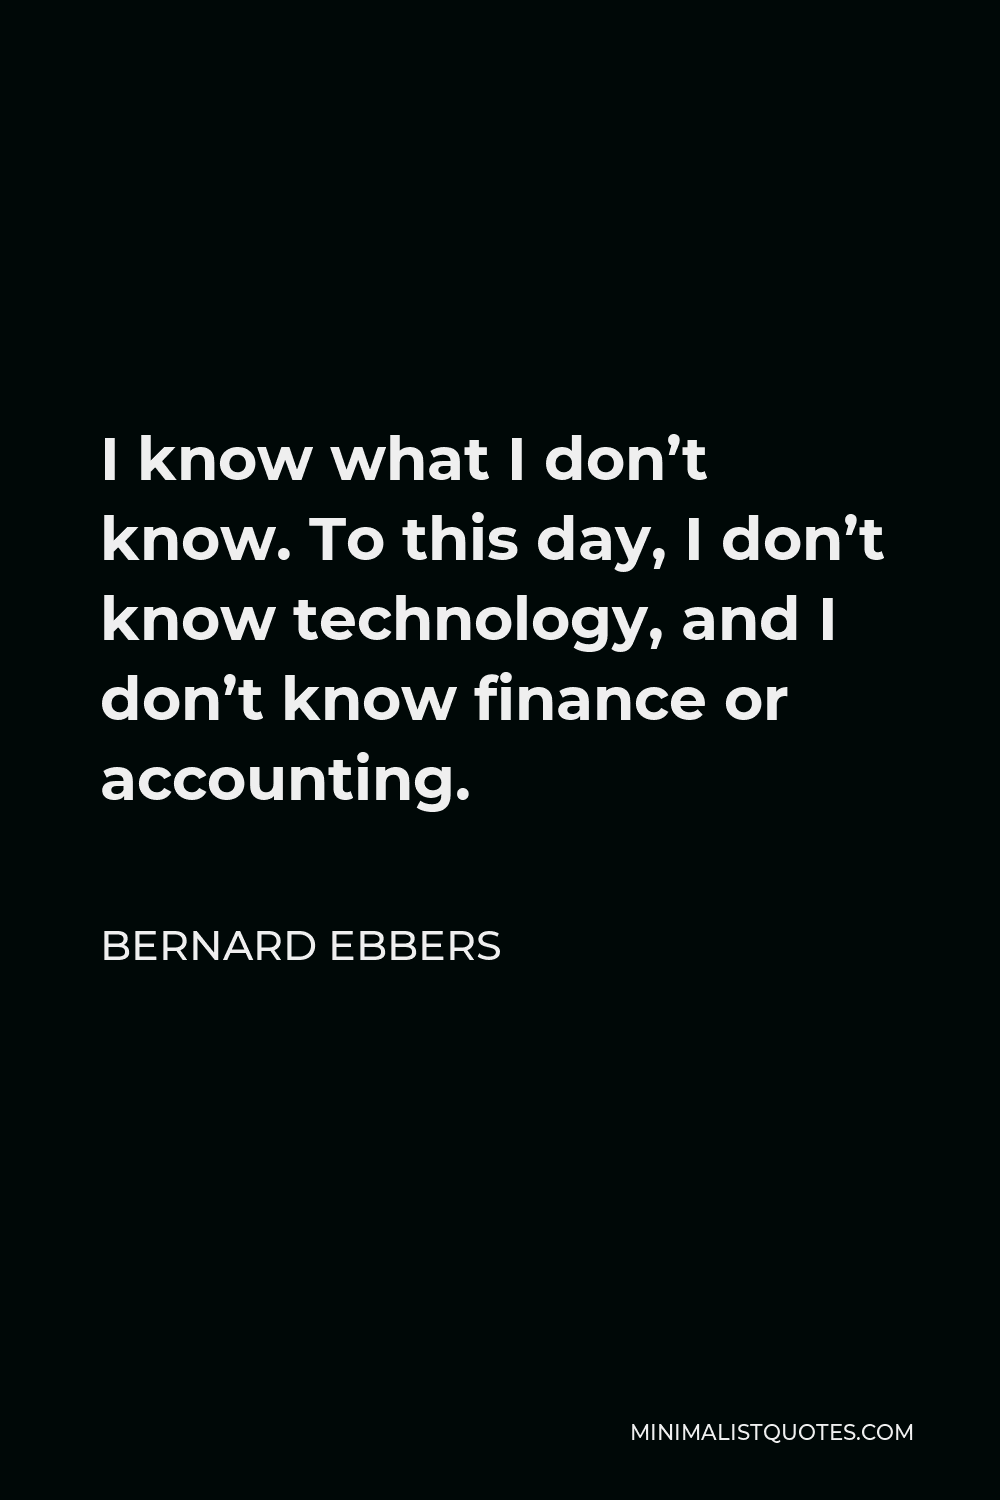 Bernard Ebbers Quote - I know what I don’t know. To this day, I don’t know technology, and I don’t know finance or accounting.